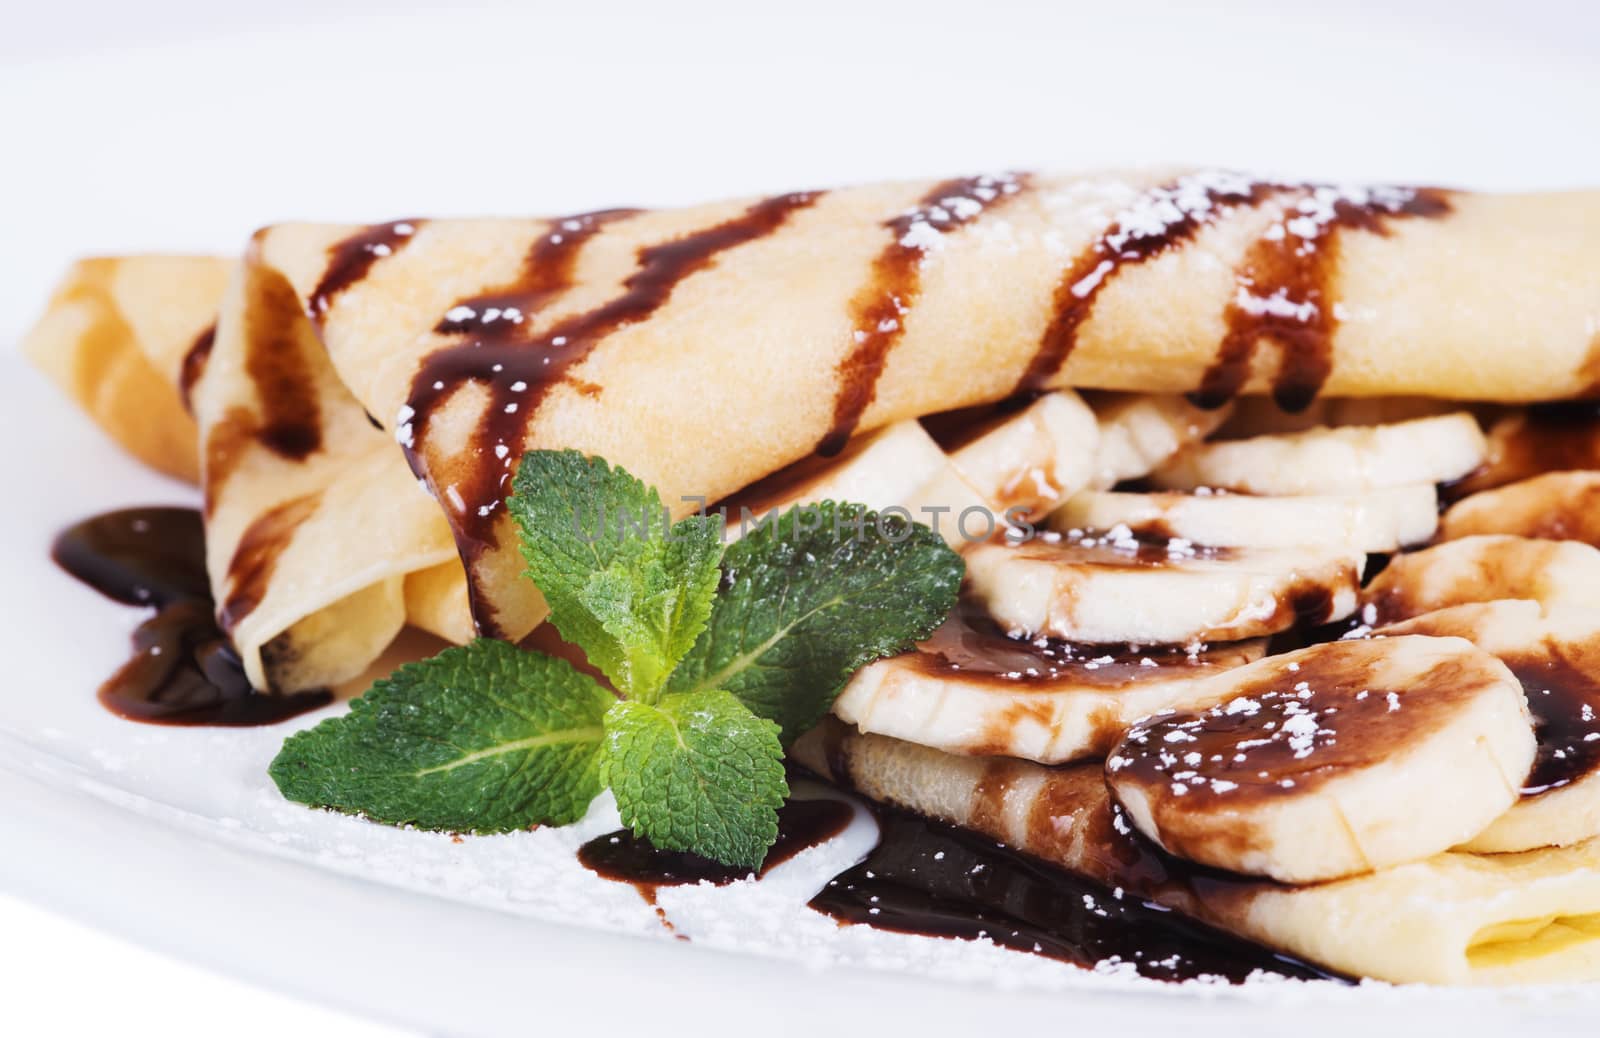 Pancakes stuffed bananas and chocolate on a plate by kzen